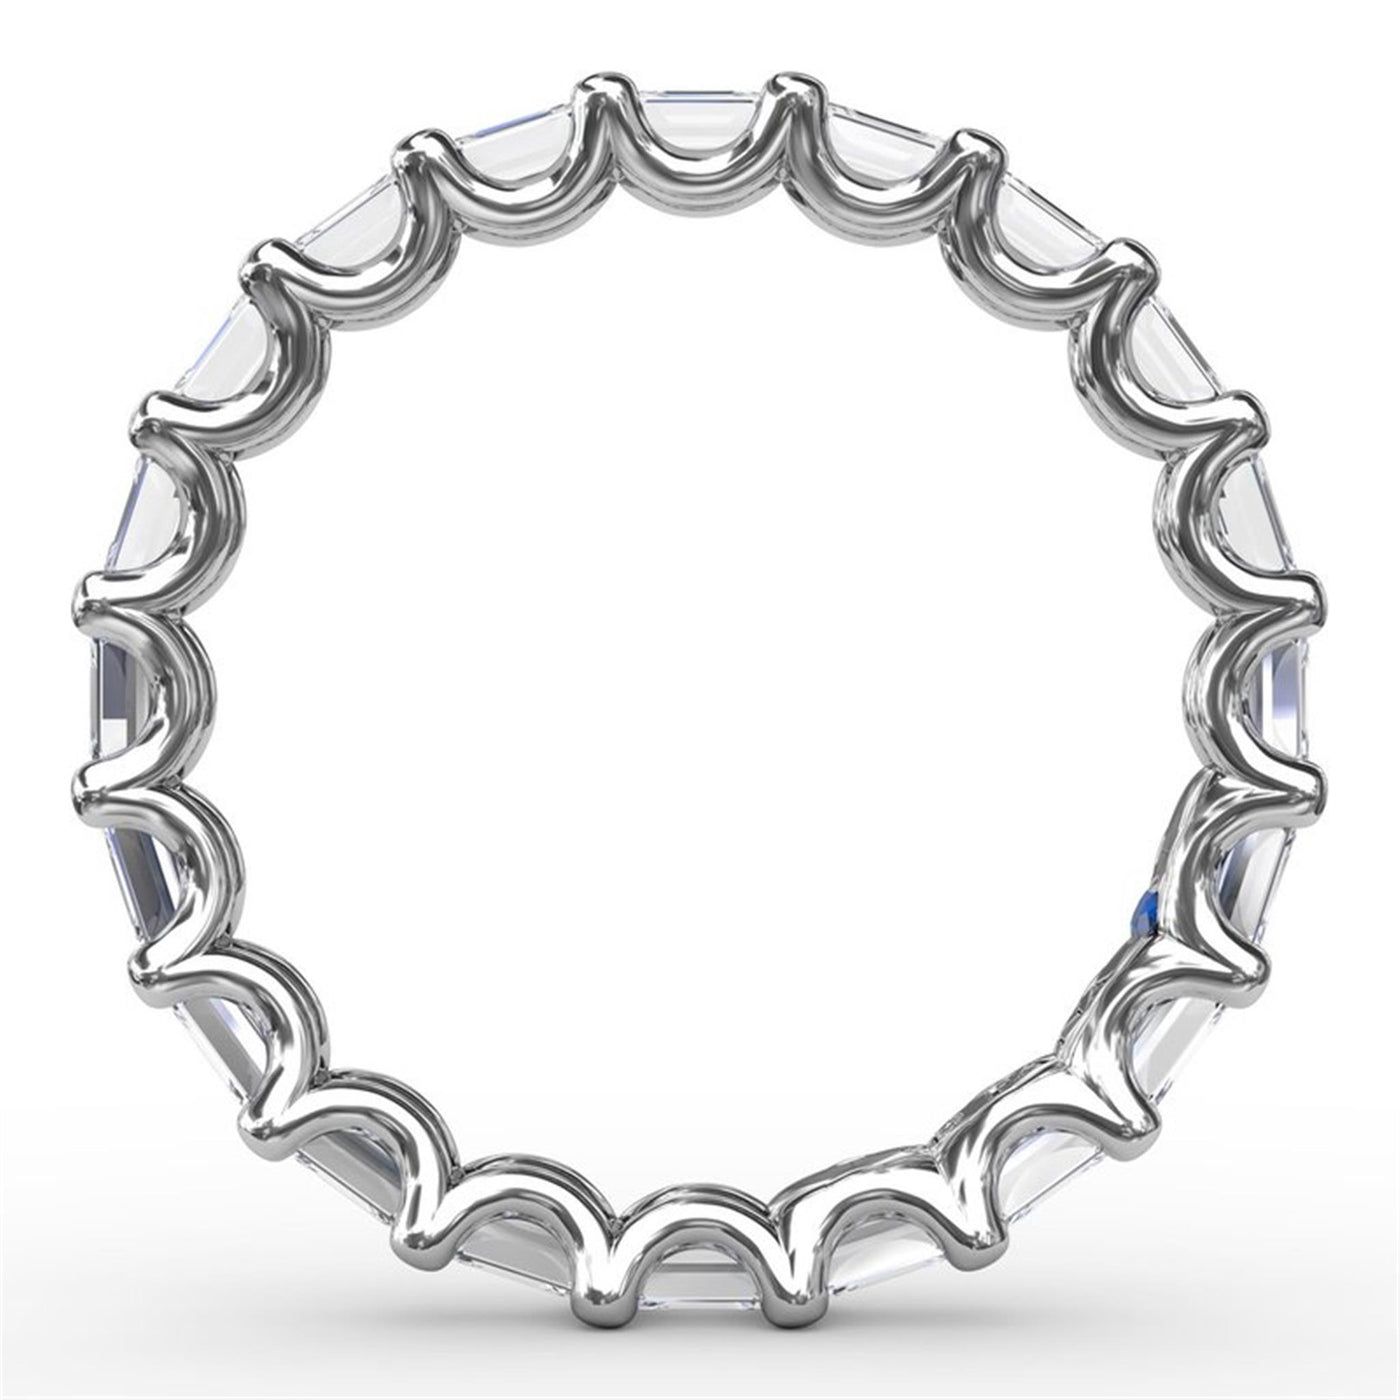 14K White Gold 1.59ctw Diamond Eternity Band 
Featuring a Polished Finish